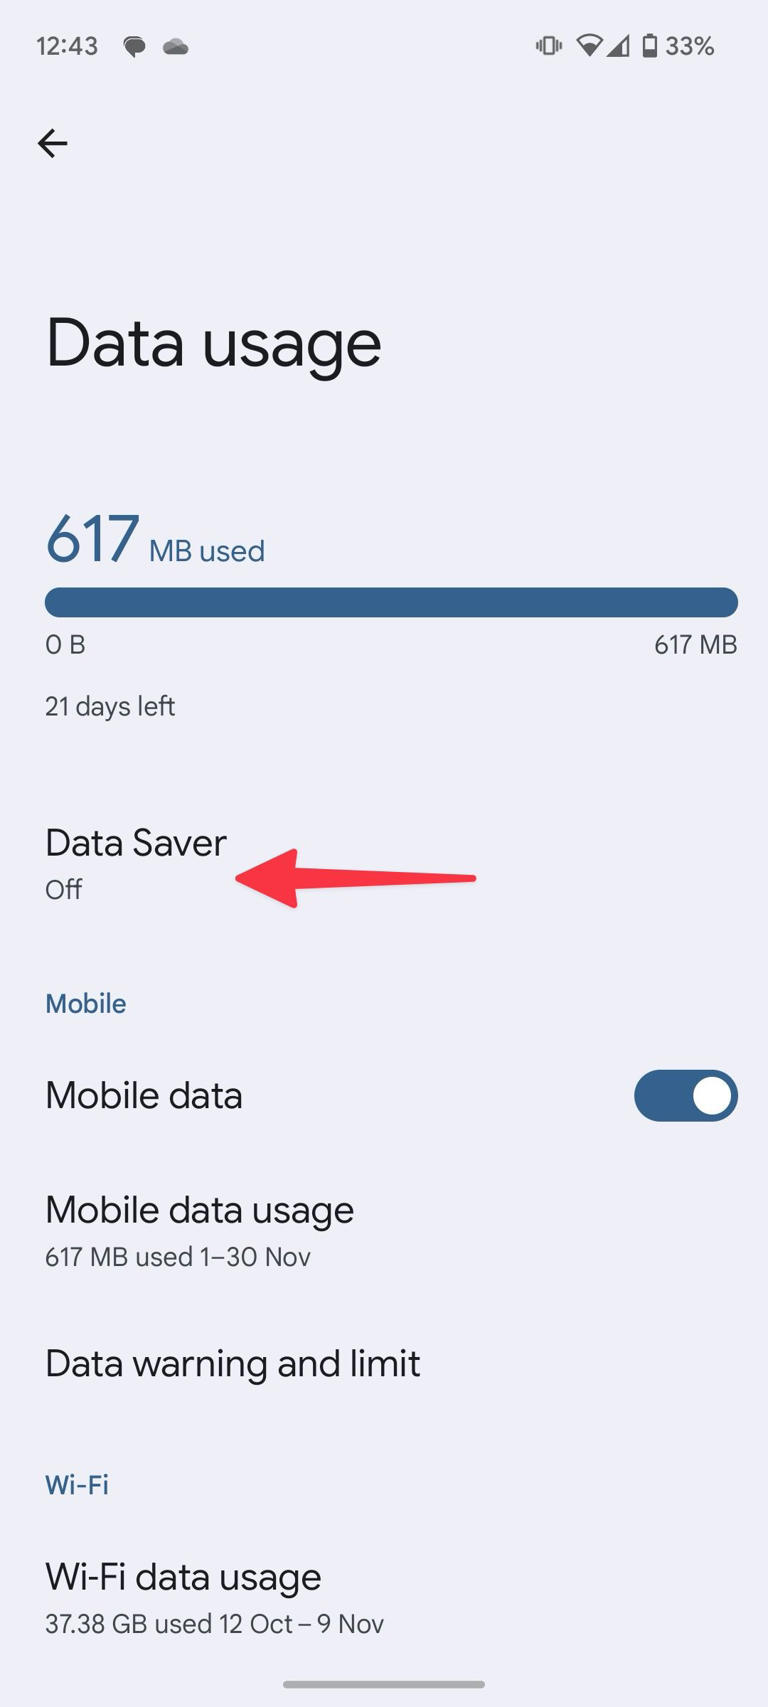 red solid arrow pointing to data saver off on data saver page in Android settings